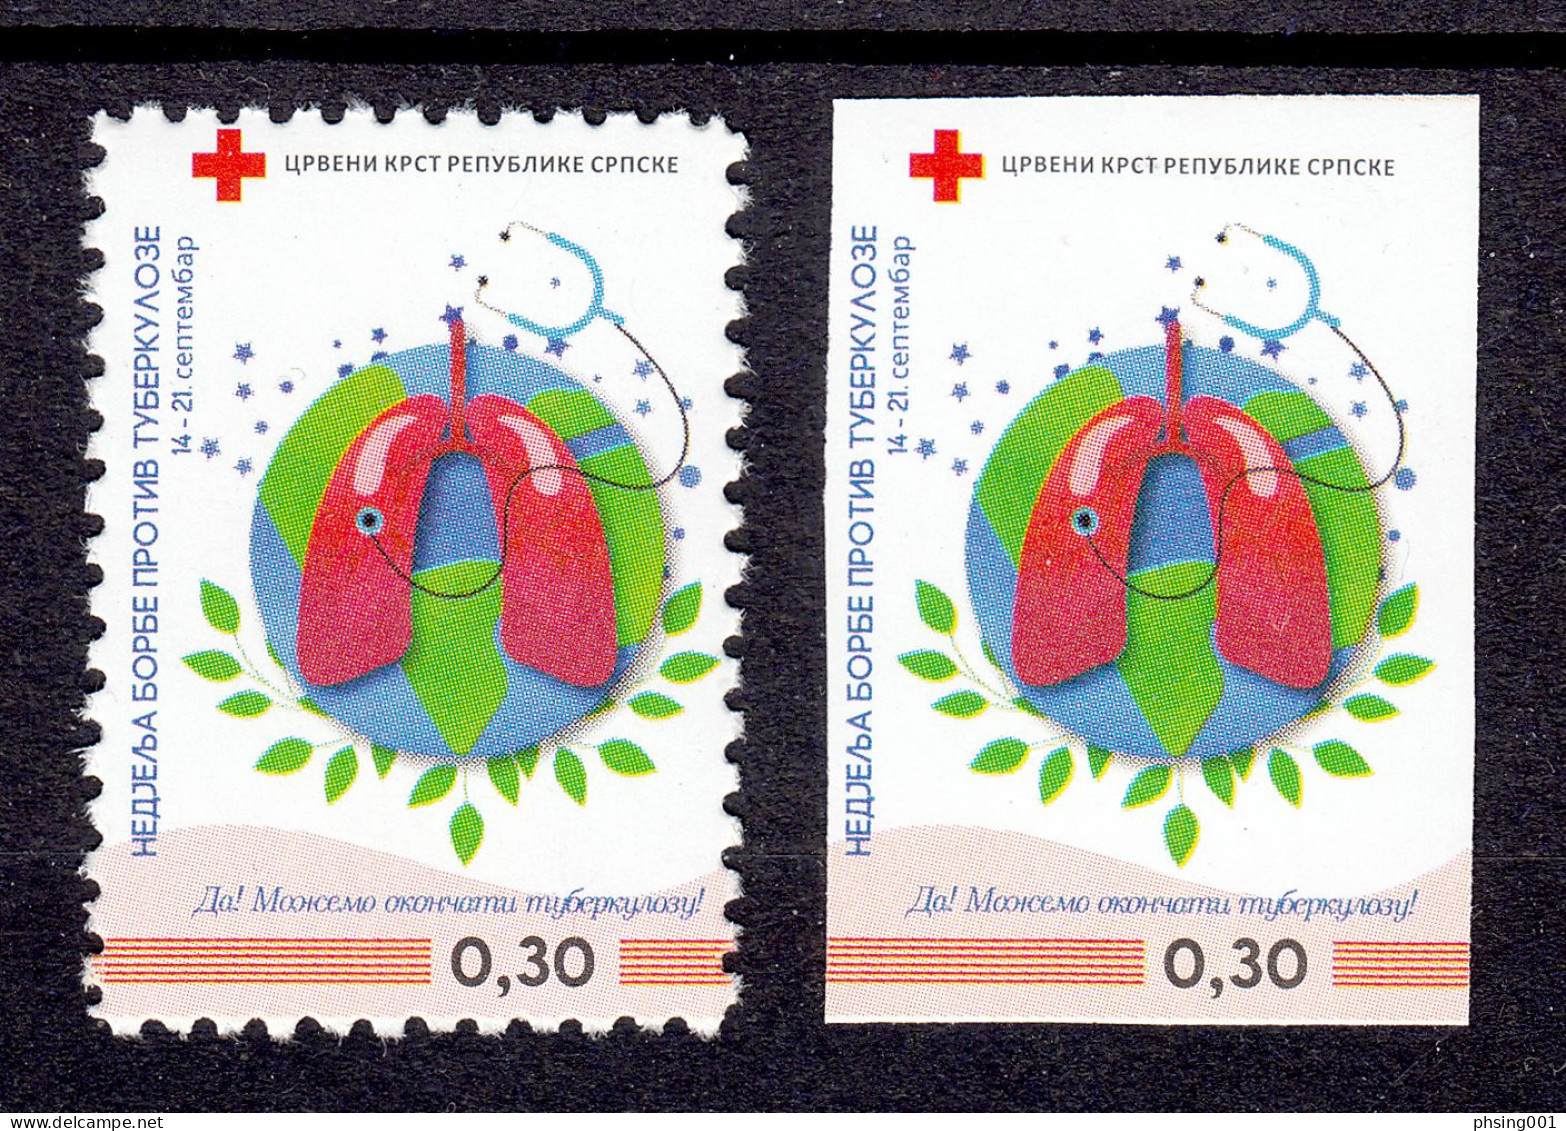 Bosnia Serbia 2023 TBC Red Cross Croix Rouge Rotes Kreuz Tax Charity Surcharge Perforated+imperforated Stamp MNH - Cruz Roja